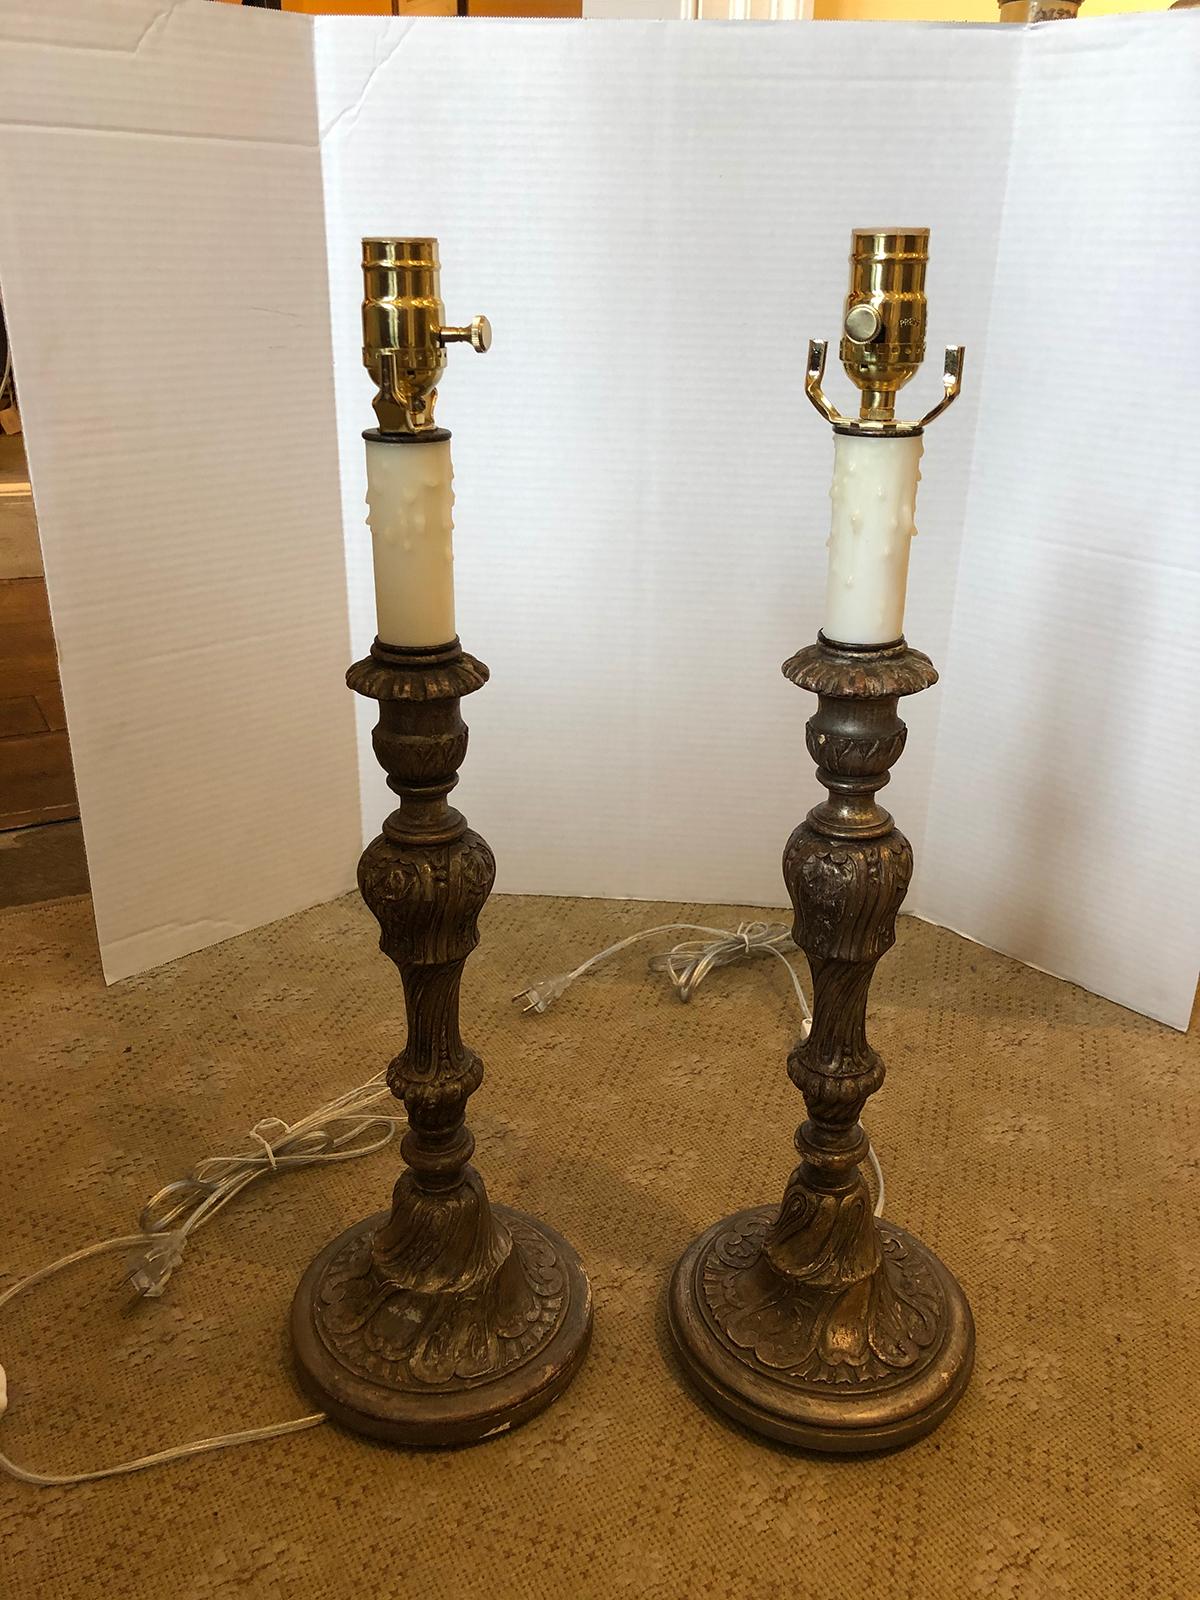 Pair of Early 20th Century Italian Silver Gilt Candlestick Lamps 4